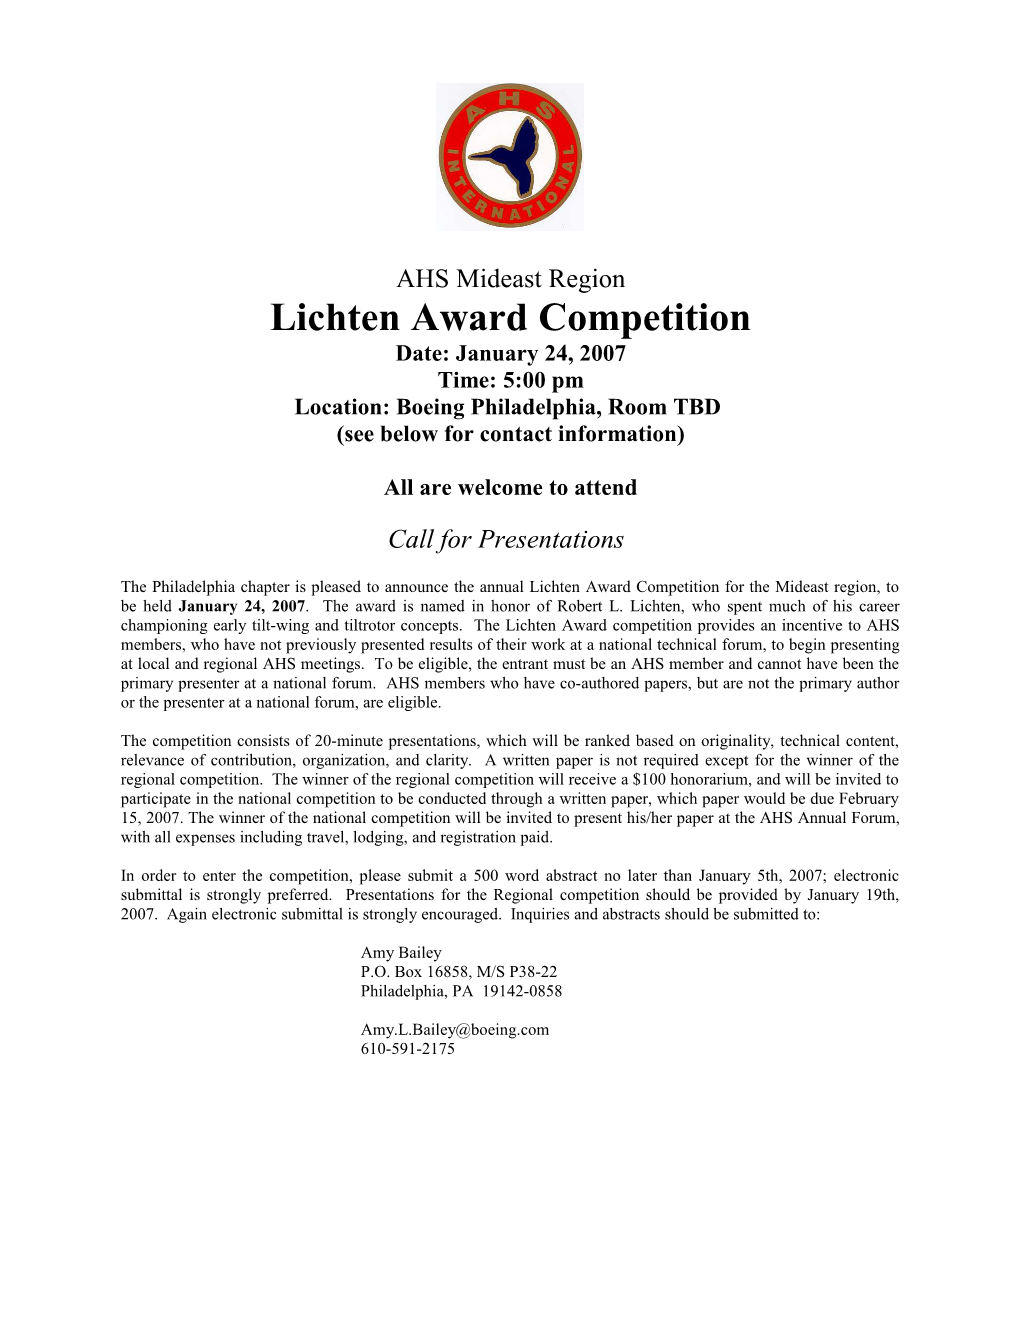 The Philadelphia Chapter Is Pleased to Announce the Annual Lichten Award Competition For